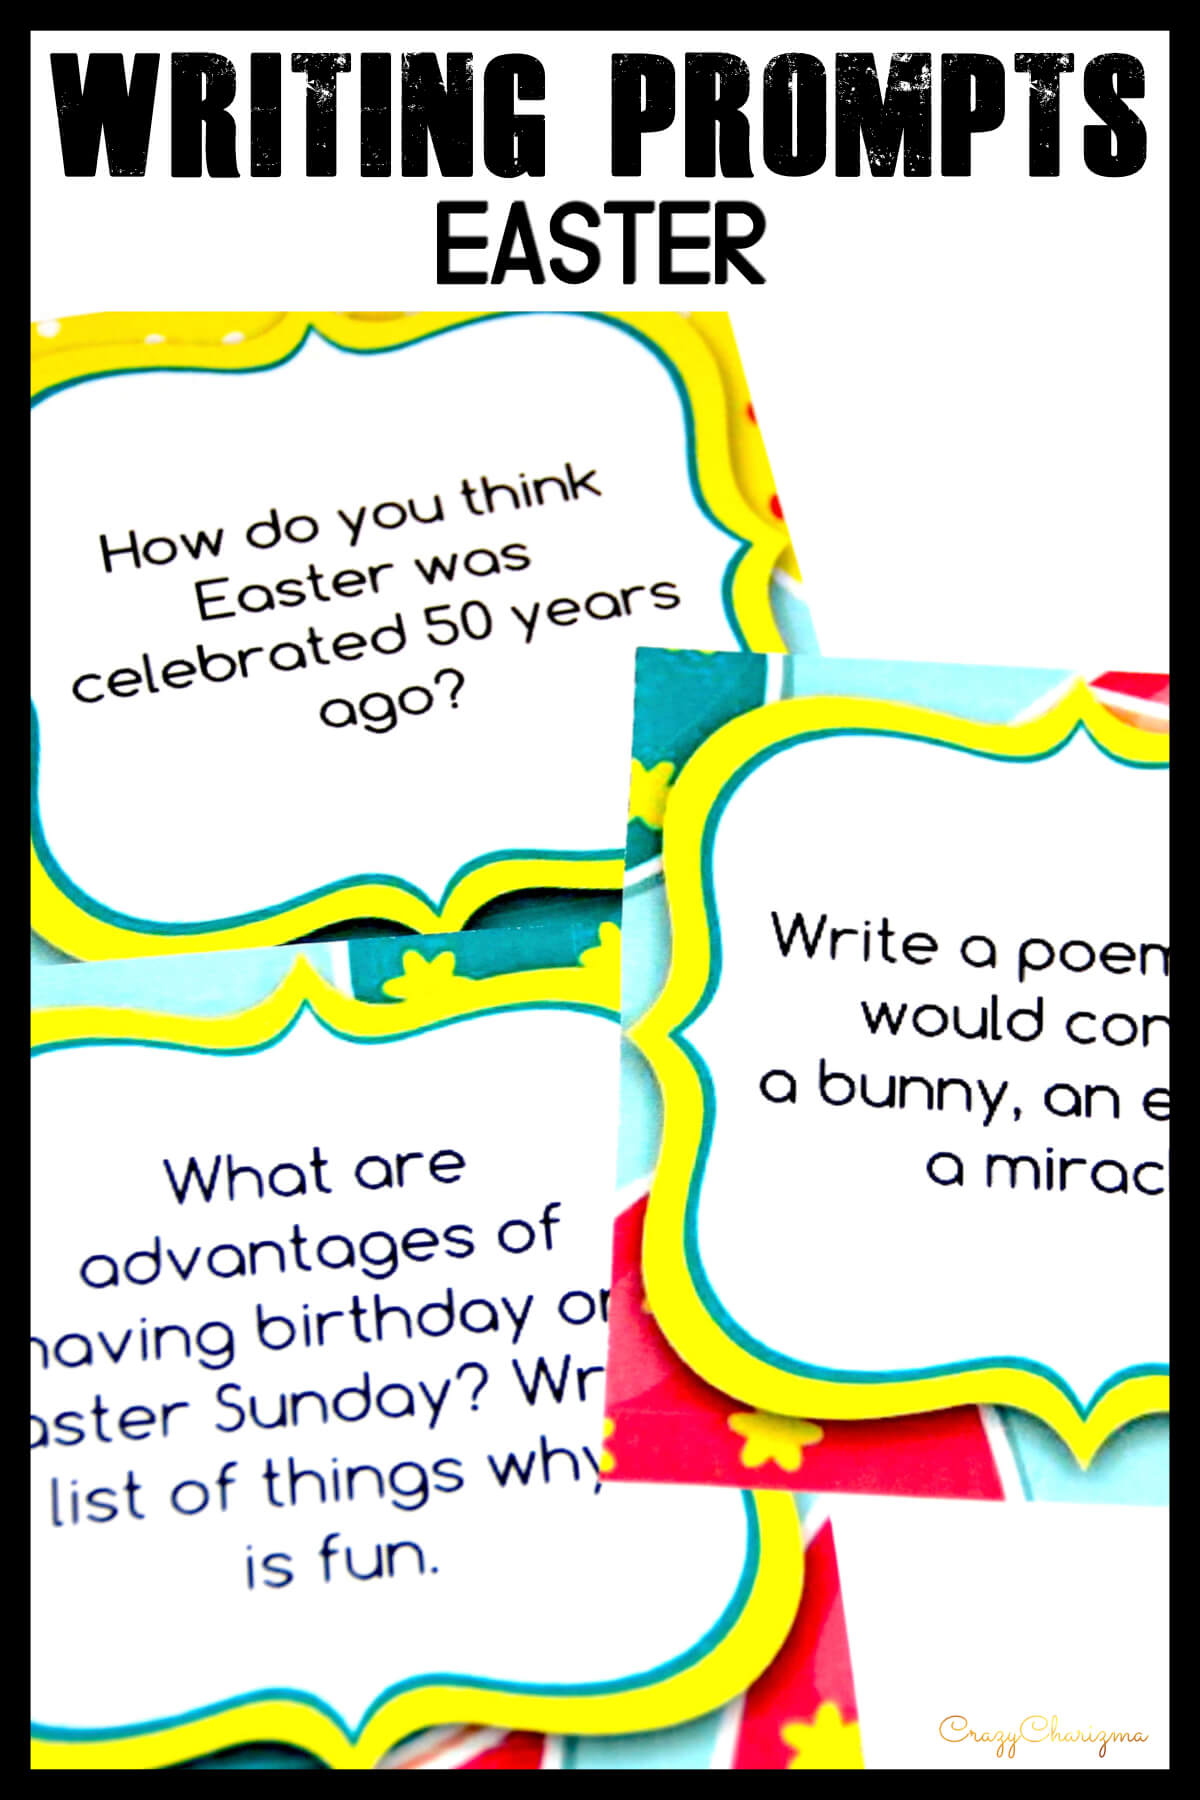 Celebrate Easter in your classroom and provide students with writing tasks and ideas. The packet contains narrative, informational and opinion writing prompts for teens. The prompts can be used as Writing Centers, as well as with adults during ESL lessons.